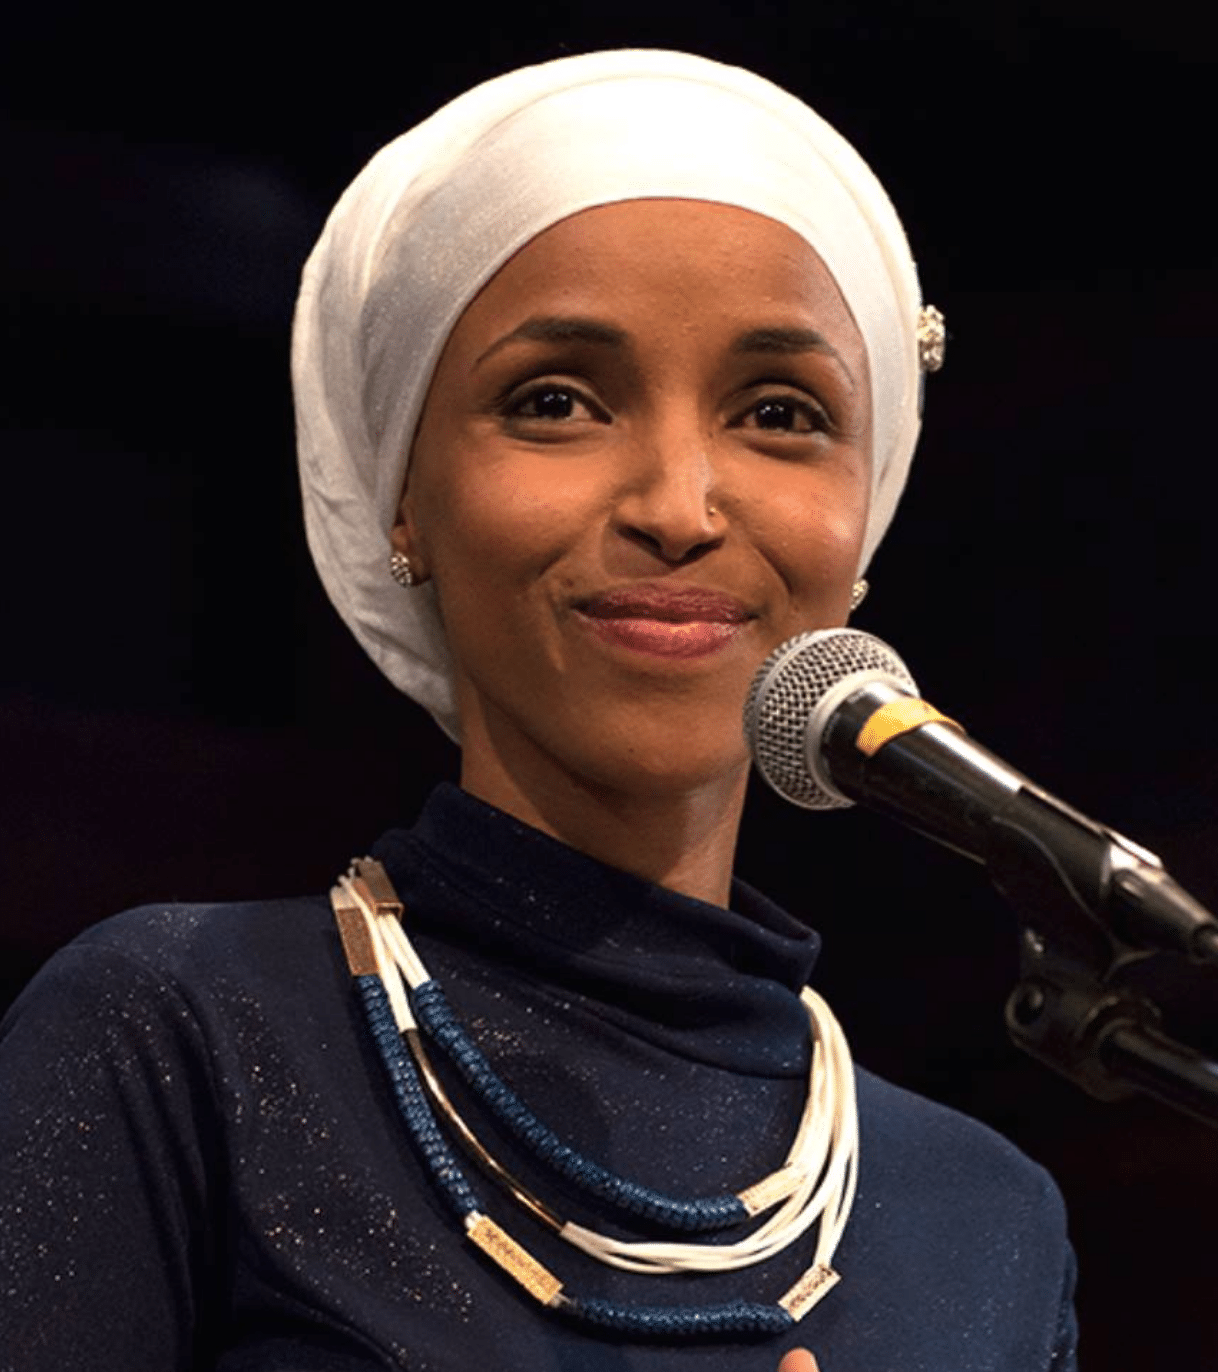 State Rep. Ilhan Omar, Democratic Candidate For Minnesota’s 5th Congressional District